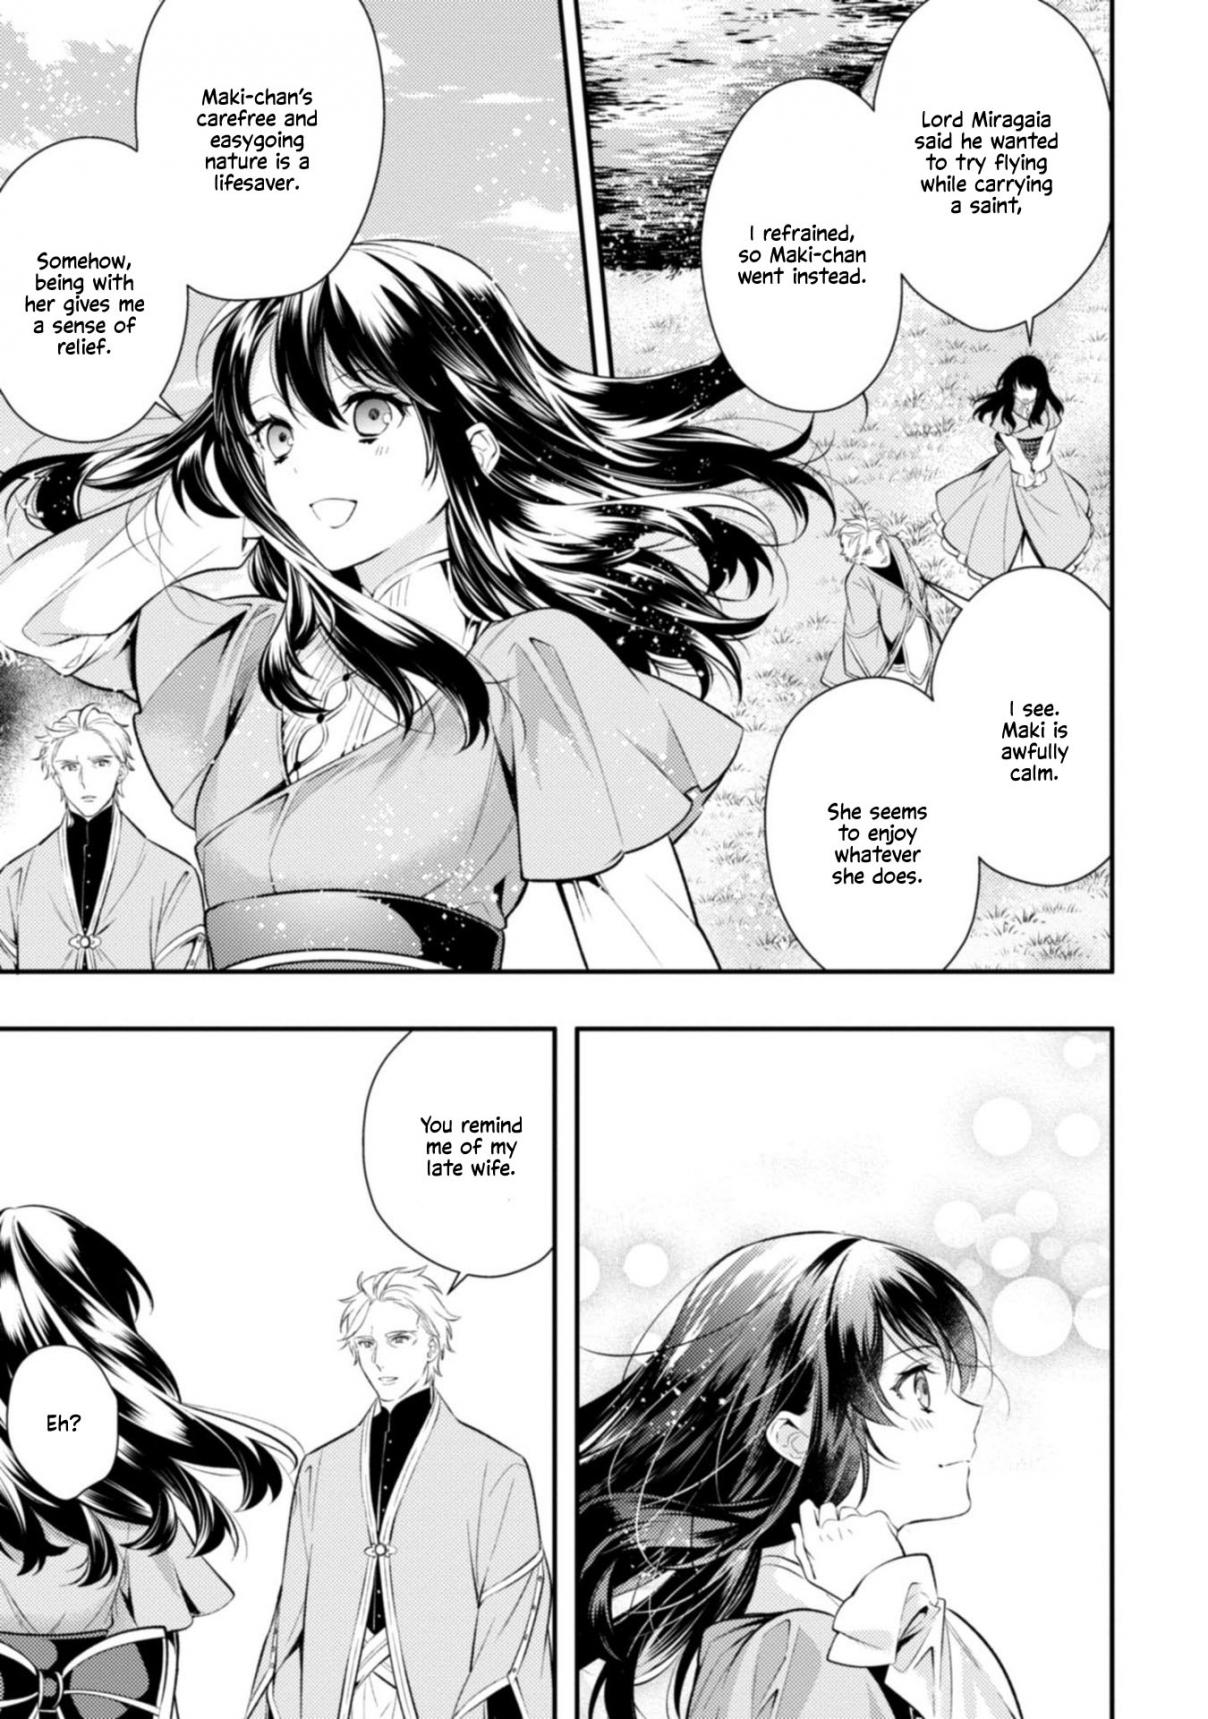 Two Saints Wander Off Into a Different World Vol. 1 Ch. 3